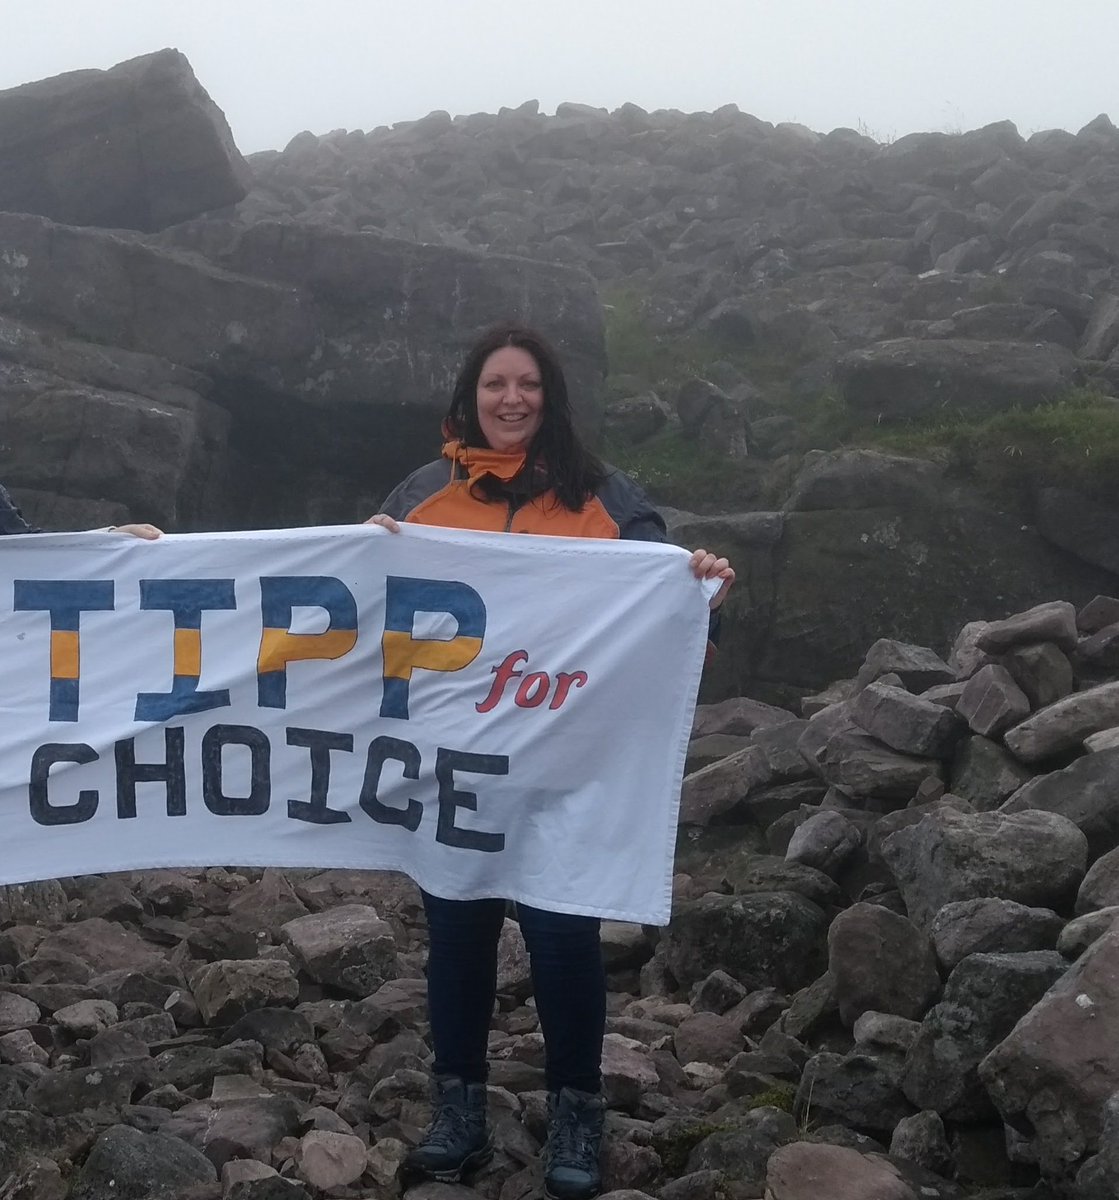 Co-founder, organiser, badge-maker, reluctant speaker & perpetual worrier,  @betaburns has only recently discovered her off switch. As  @EmmaQBurns she will continue actifizzing on disability rights. Thank you Emma for all the work.  #TippRepealers